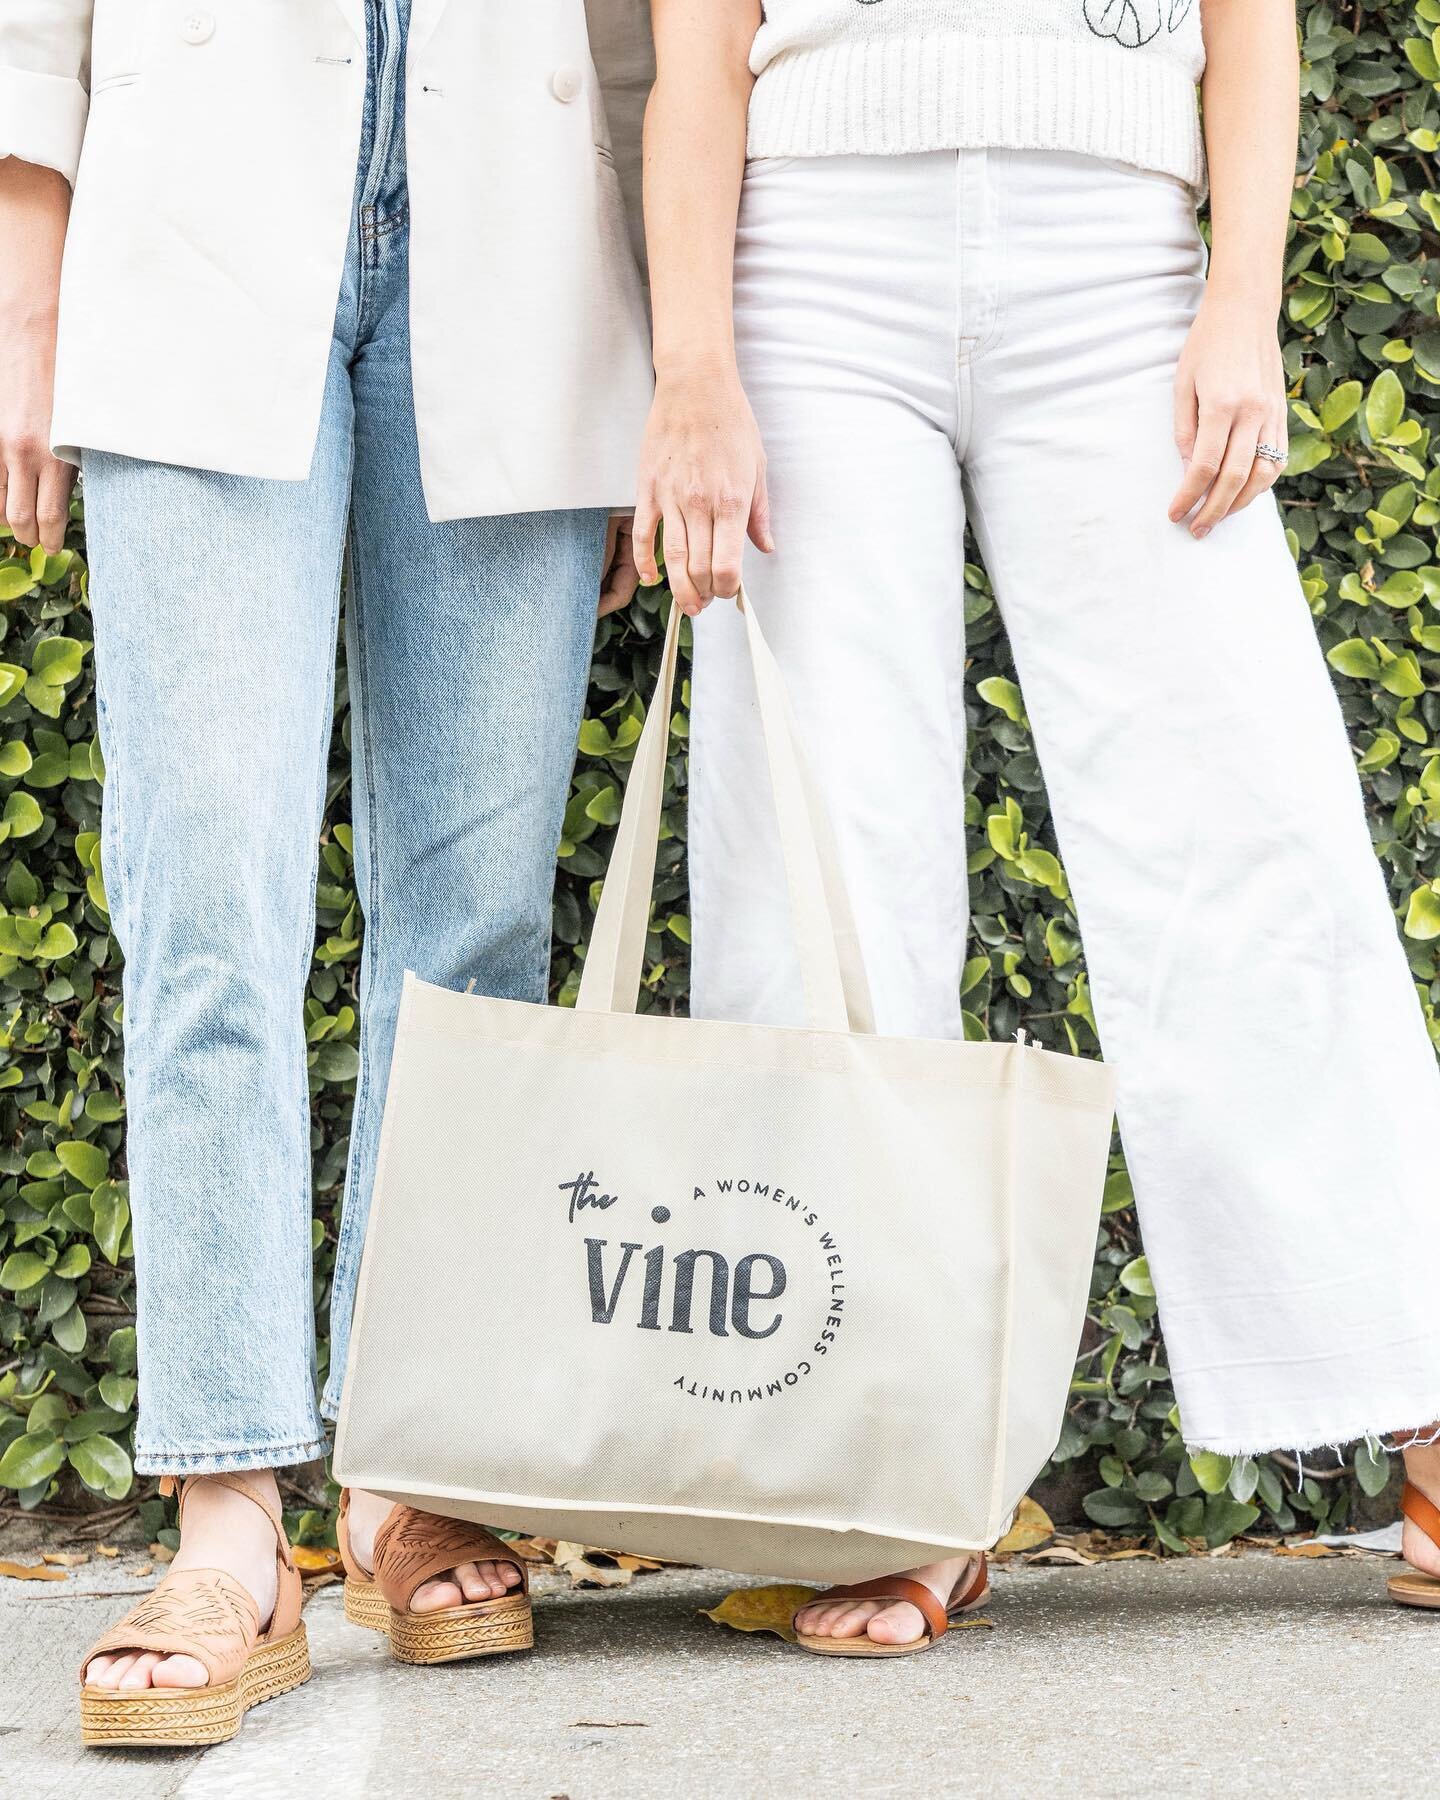 At The Vine you can expect to be seen, heard and understood. 💫

We welcome women at all different phases of life. New to Charleston? The Vine is for you! A new mom? The Vine is for you! Looking to incorporate more wellness into your life? The Vine i